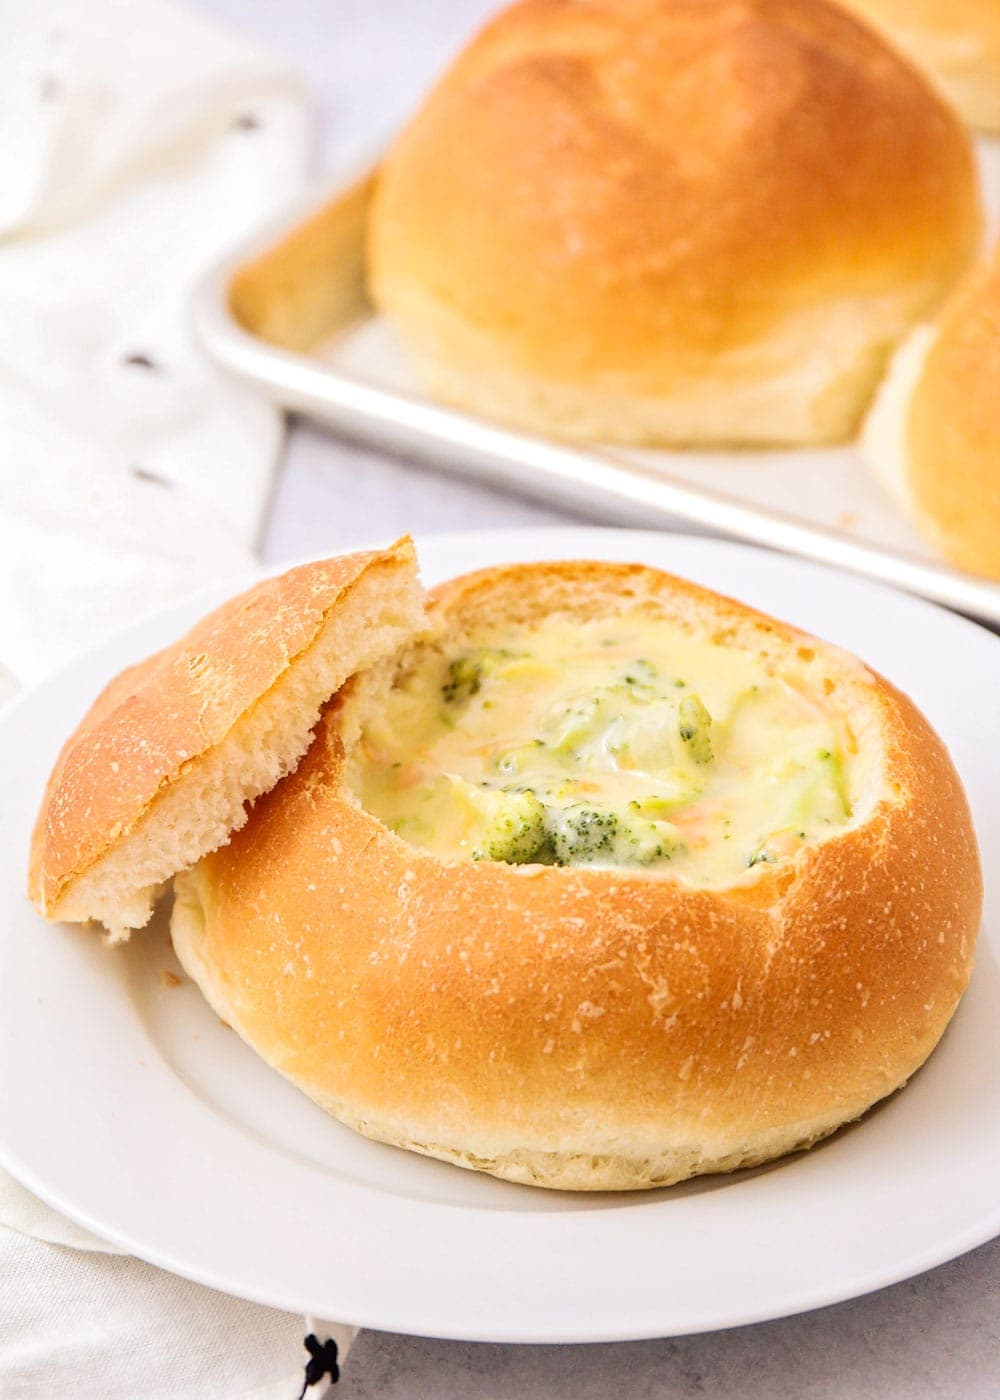 Homemade bread bowls with soup inside